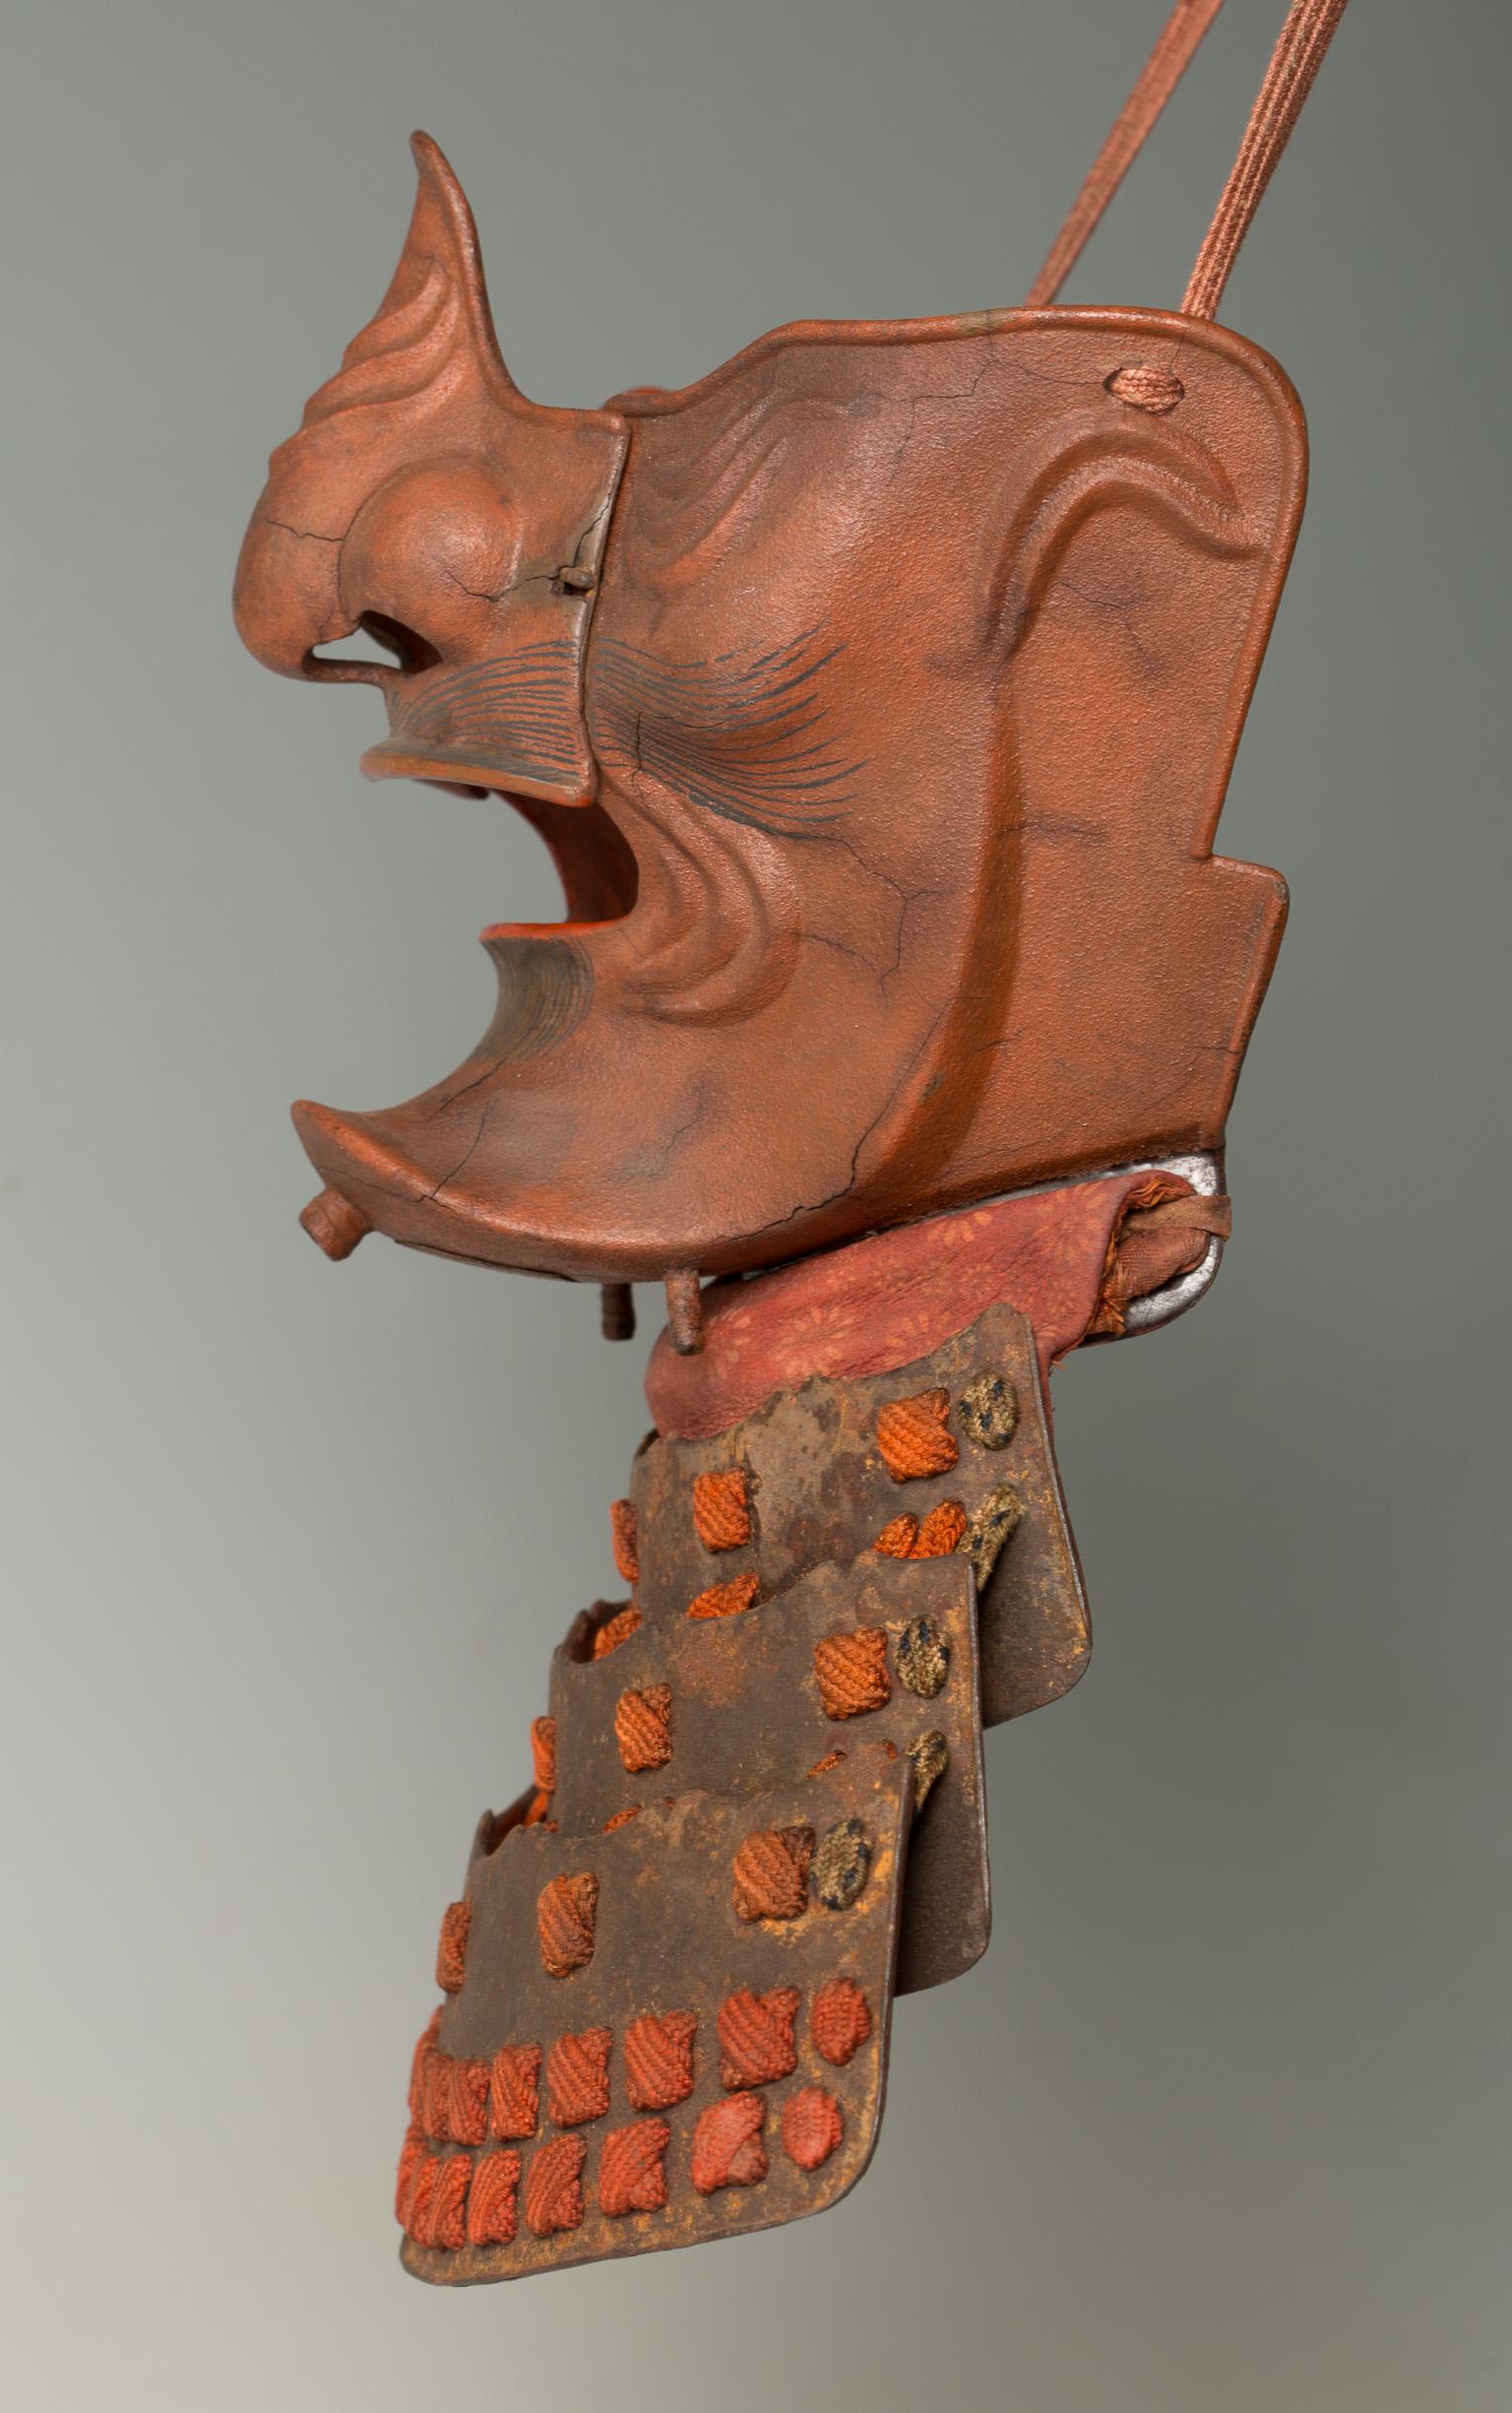 Samurai mask with a fierce expression
Ressei Menpo

DATE Edo period (1615 - 1867), 18th century
 

A red lacquered high-level mask, with fierce (ressei) expression finely embossed with wrinkles all over the face. The expression is emphasized